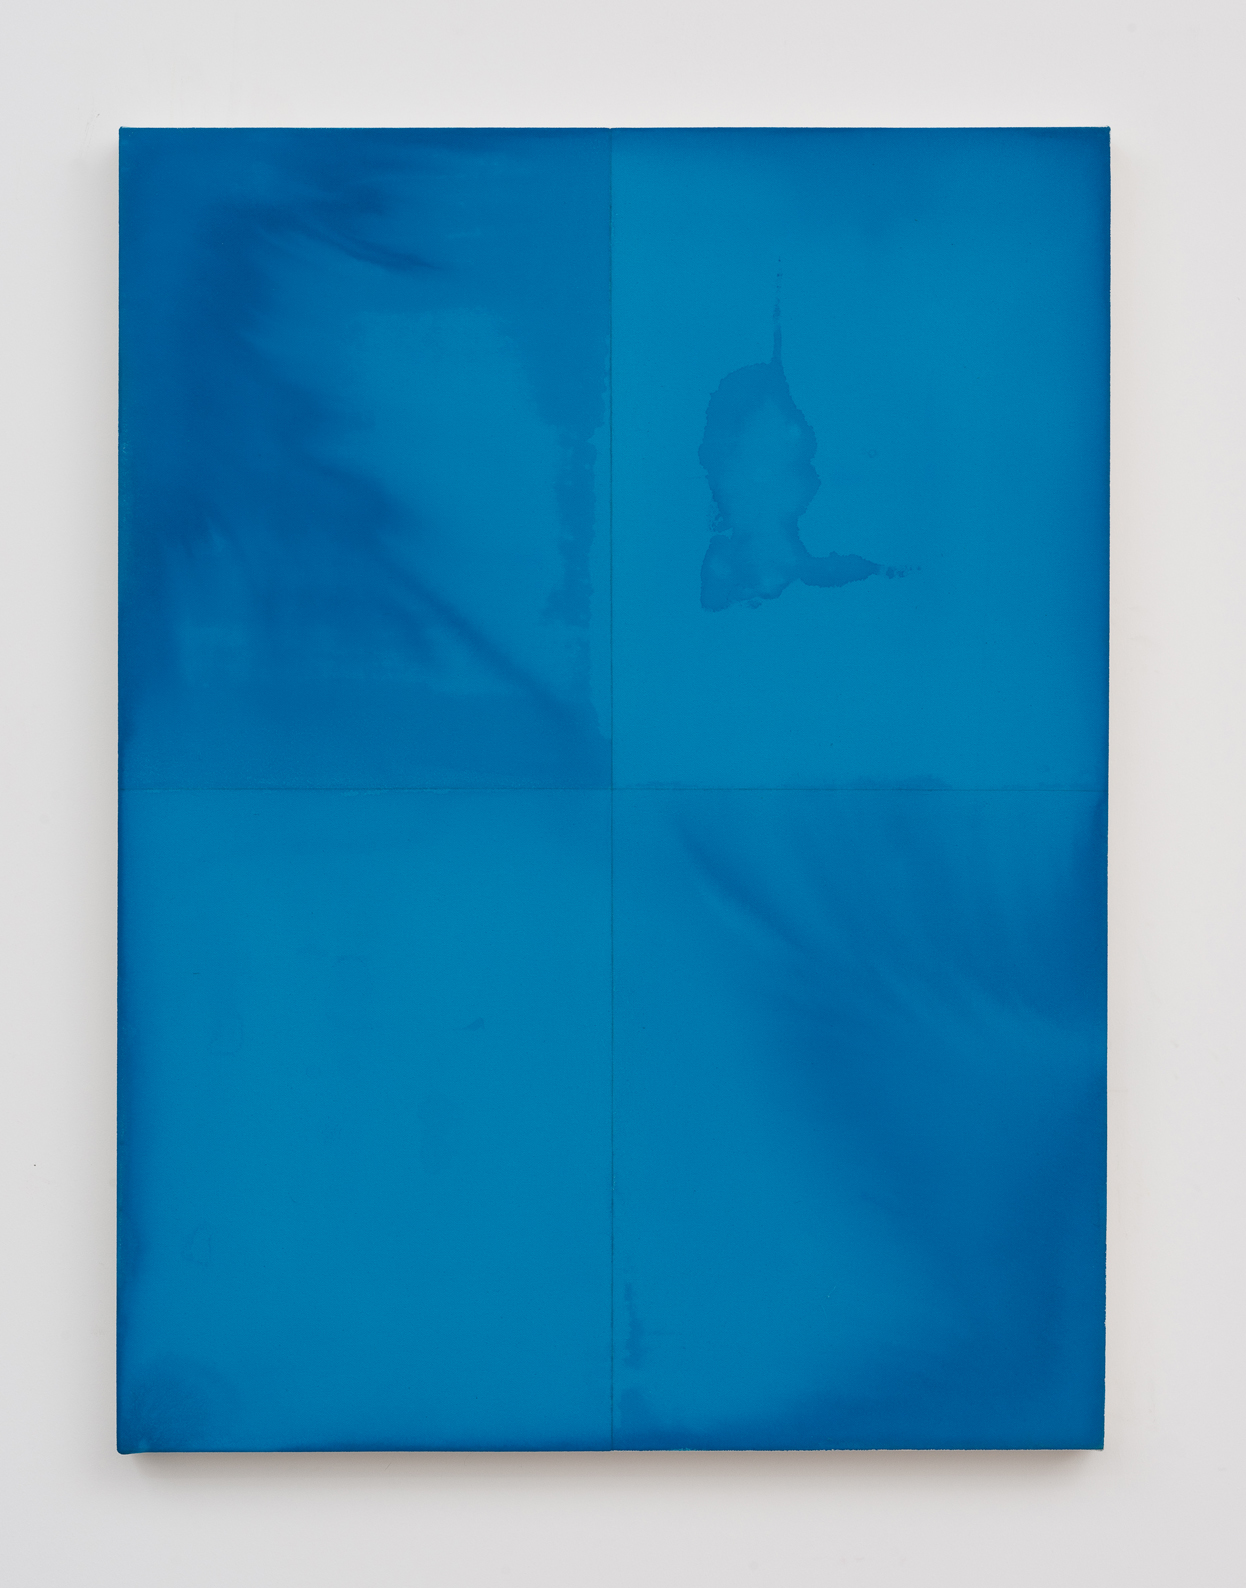     Blue Example Monochrome / Individually Treated Quadrants 2013 Acrylic and pencil on canvas:&nbsp;91.4 x 68.5 cm / 36 x 27 in 